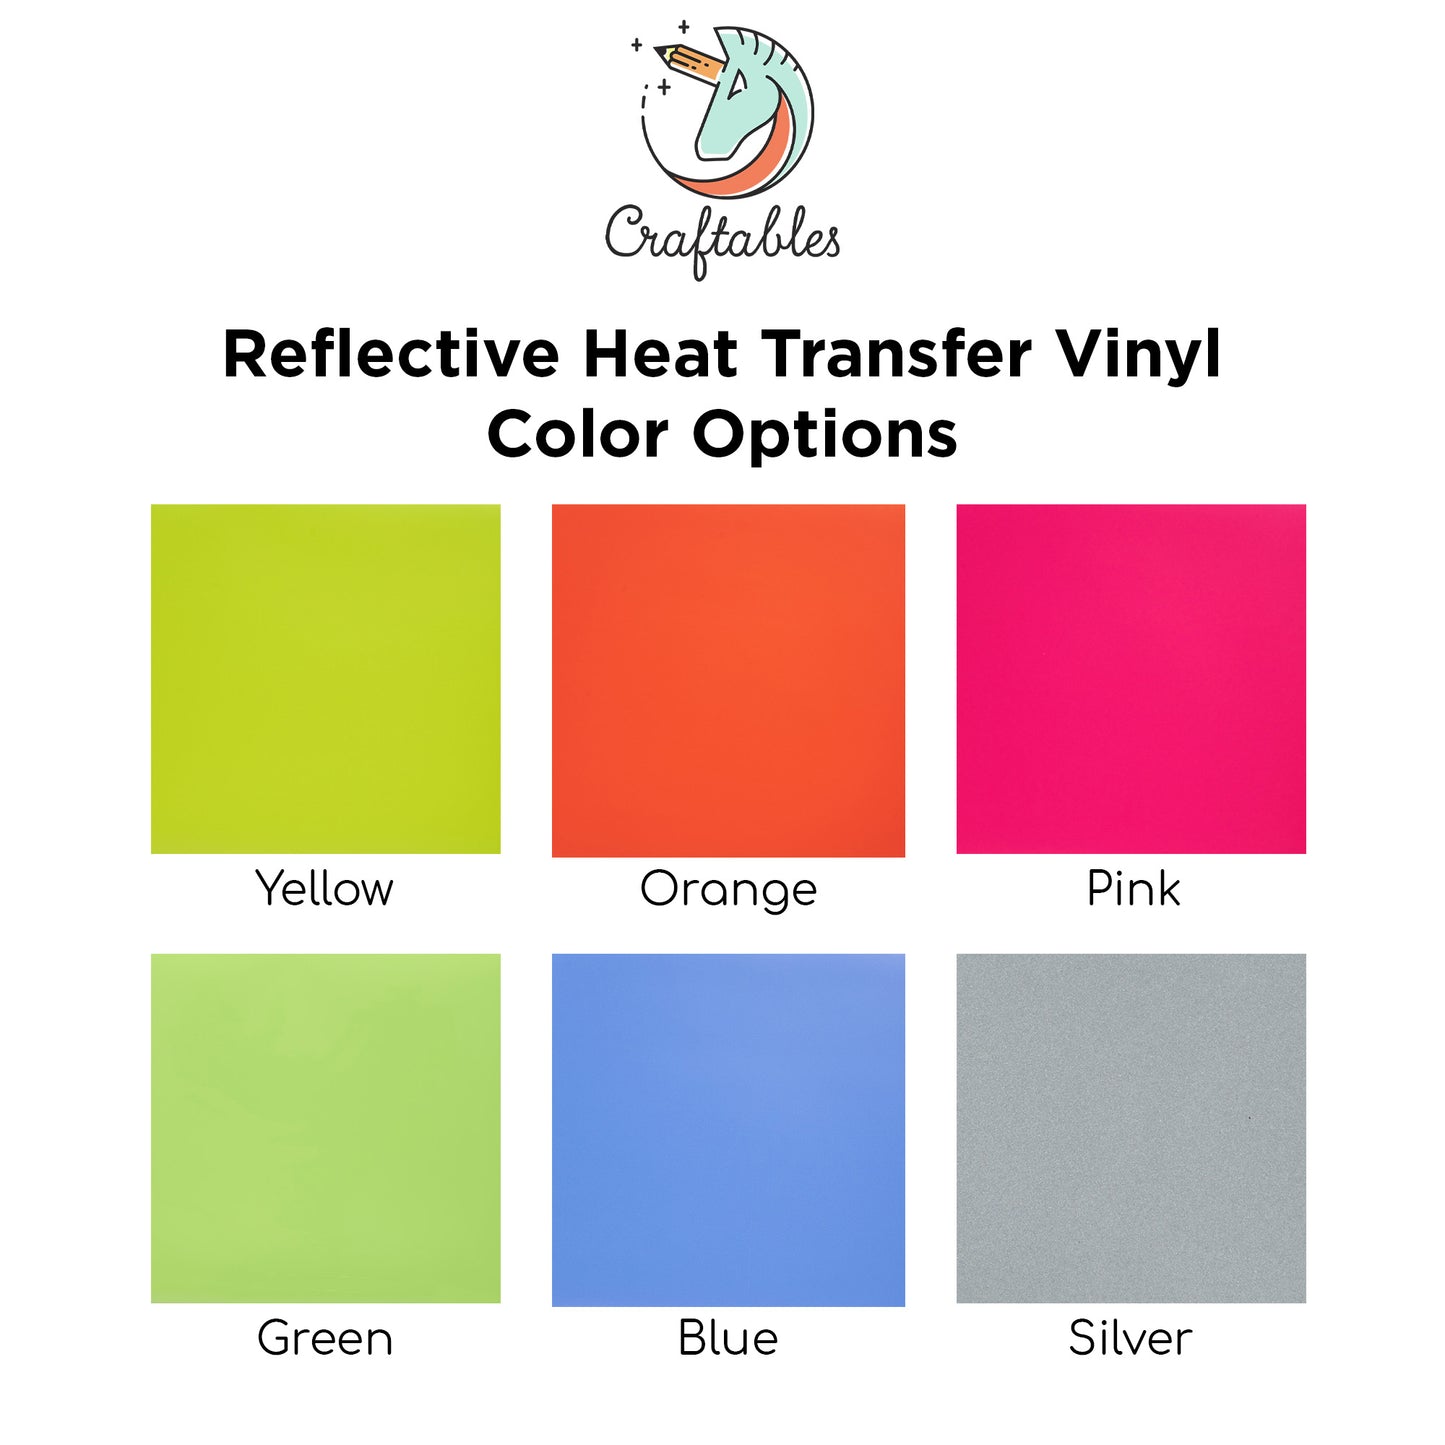 Pink Reflective Heat Transfer Vinyl Sheets By Craftables